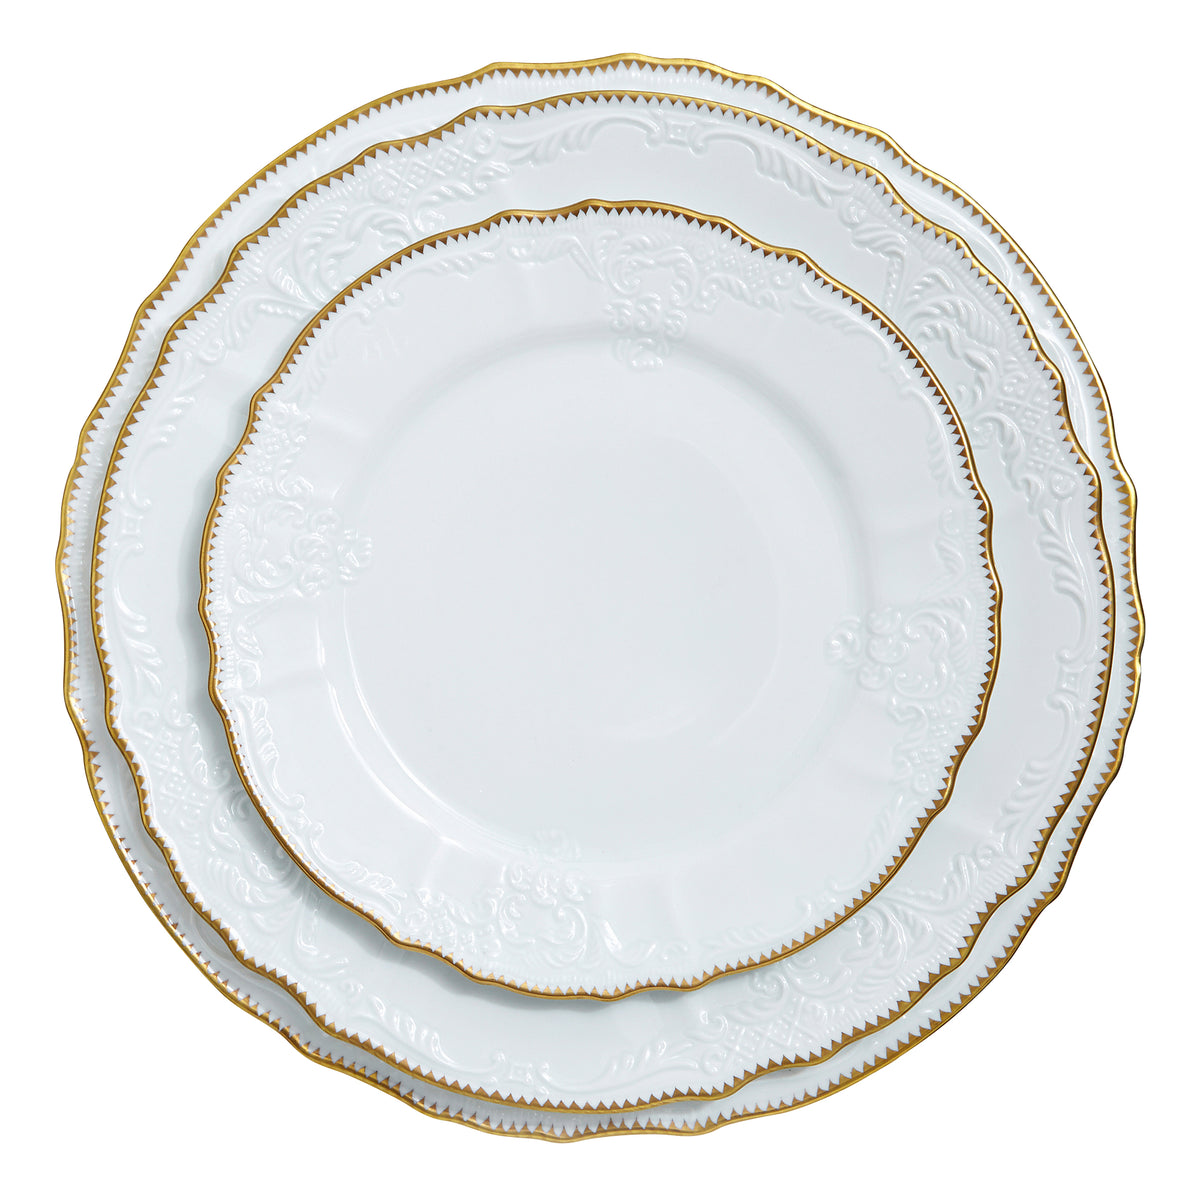 Simply Anna Charger Plate